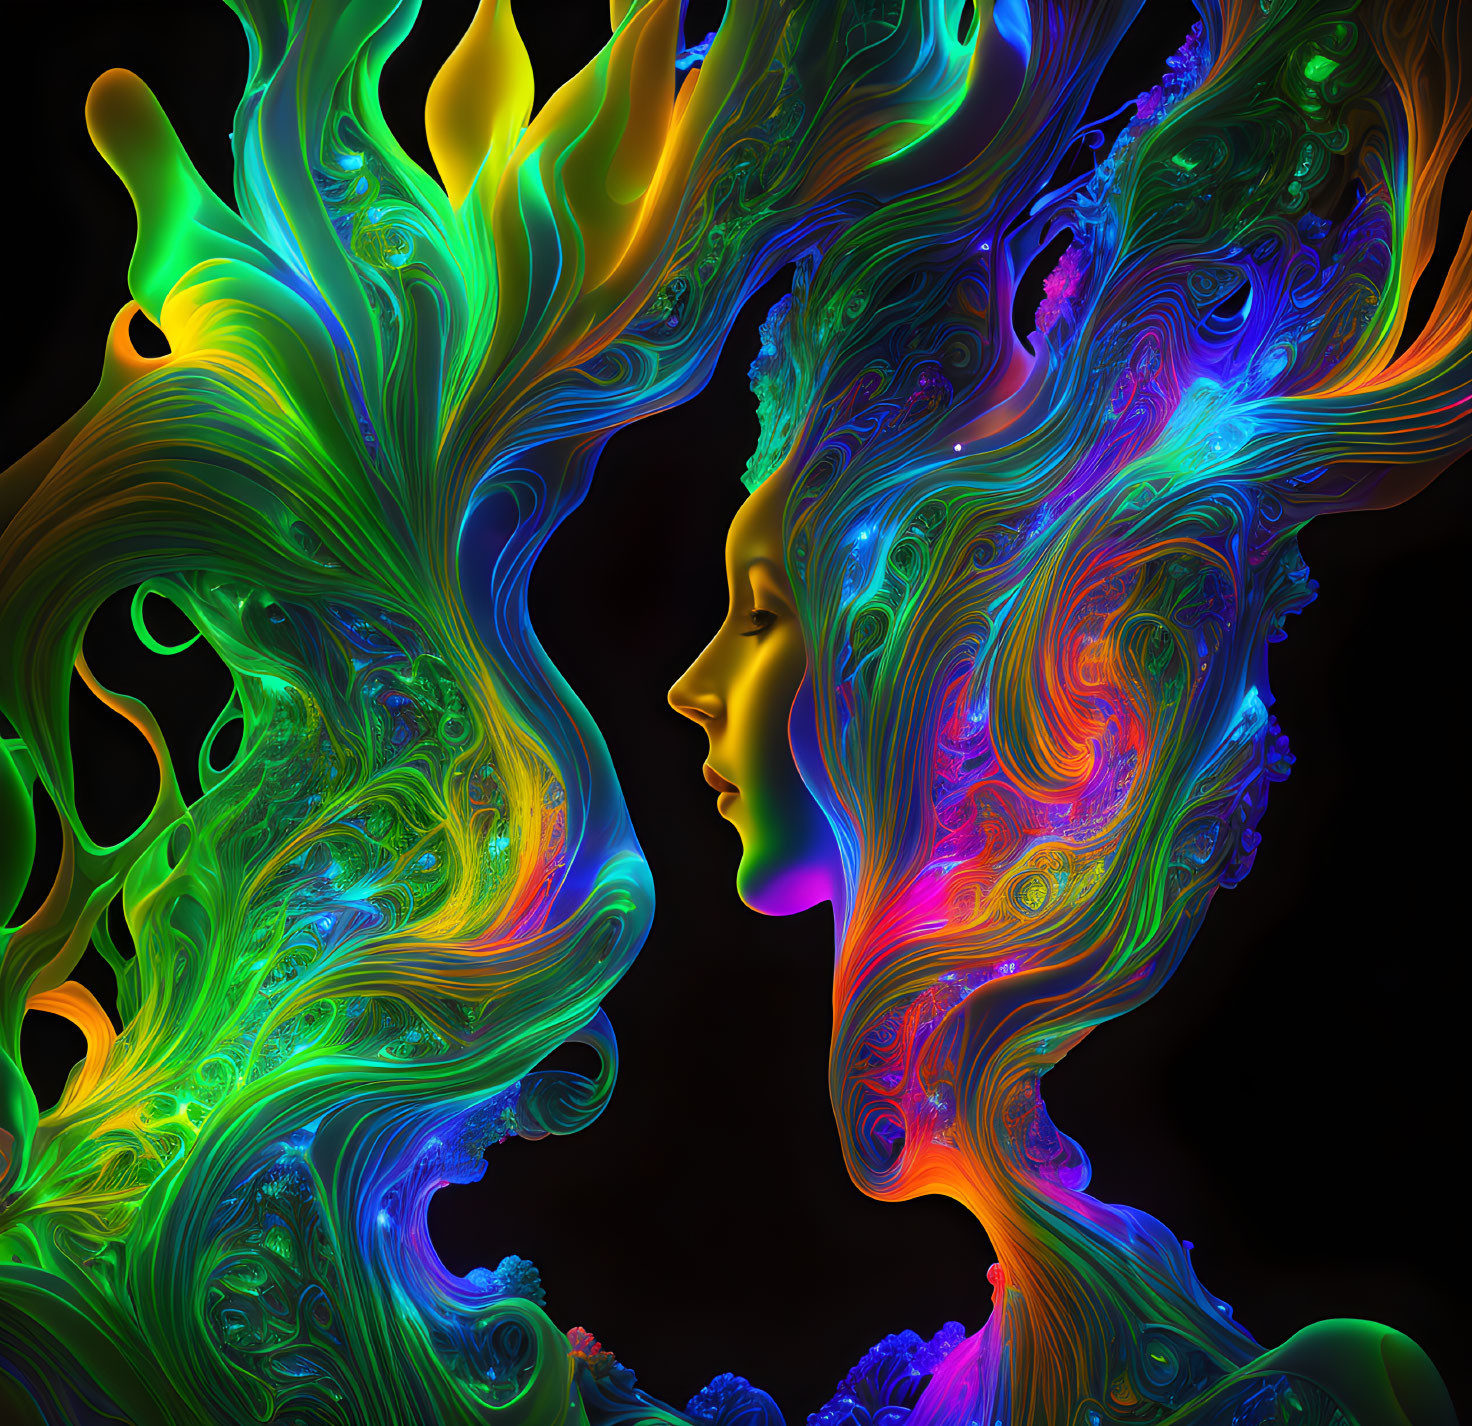 Vibrant Multicolored Abstract Profiles on Black Background